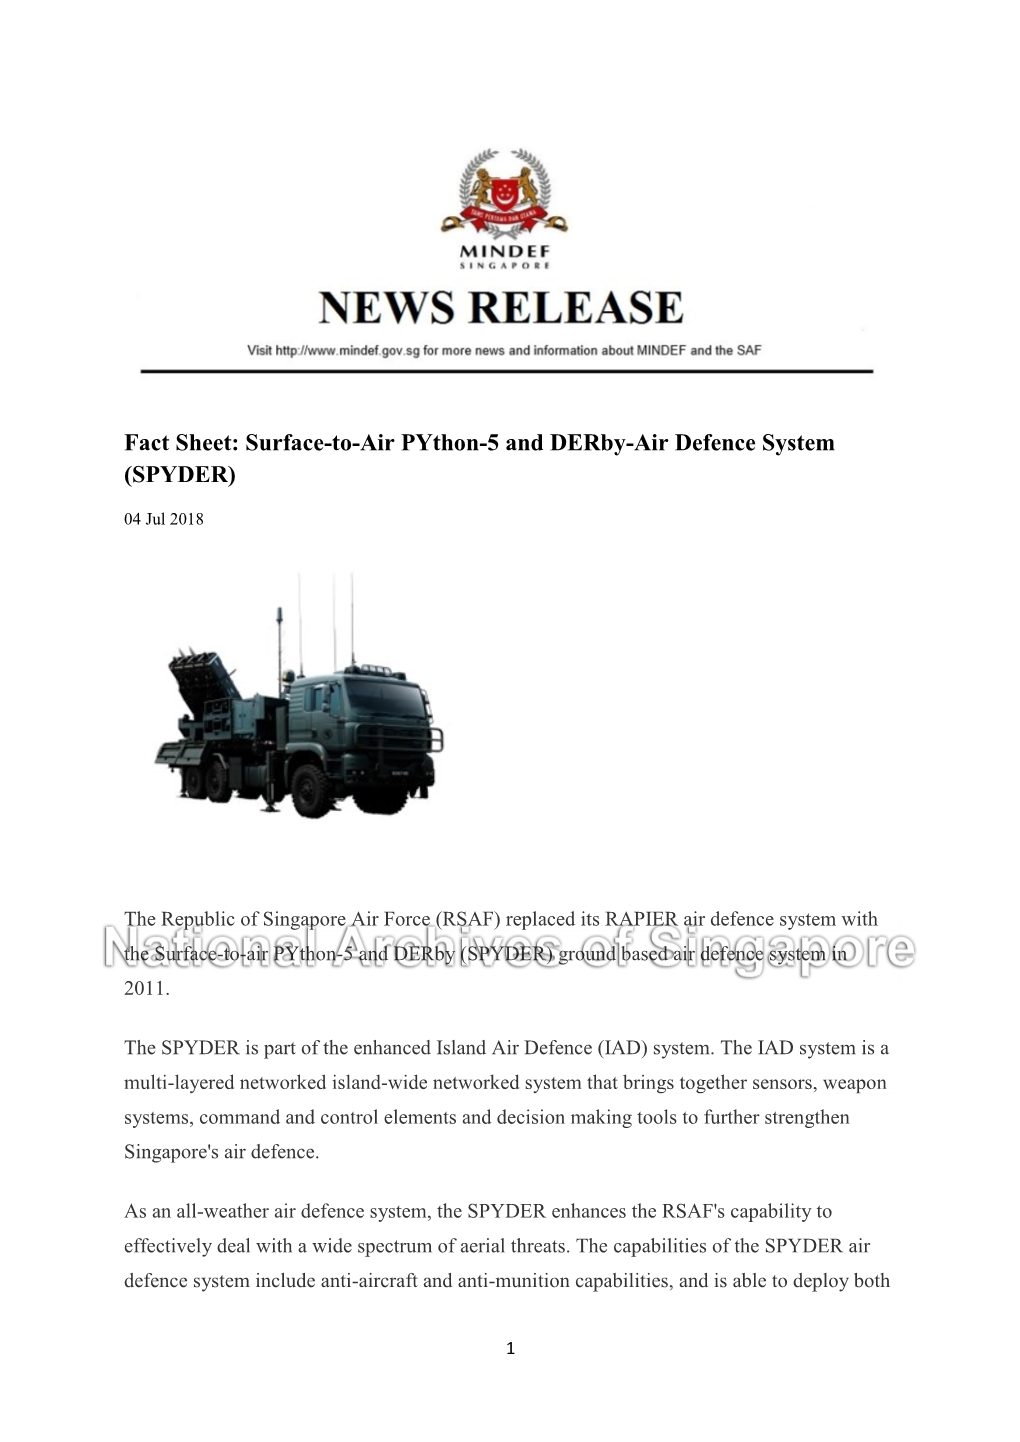 Fact Sheet: Surface-To-Air Python-5 and Derby-Air Defence System (SPYDER)